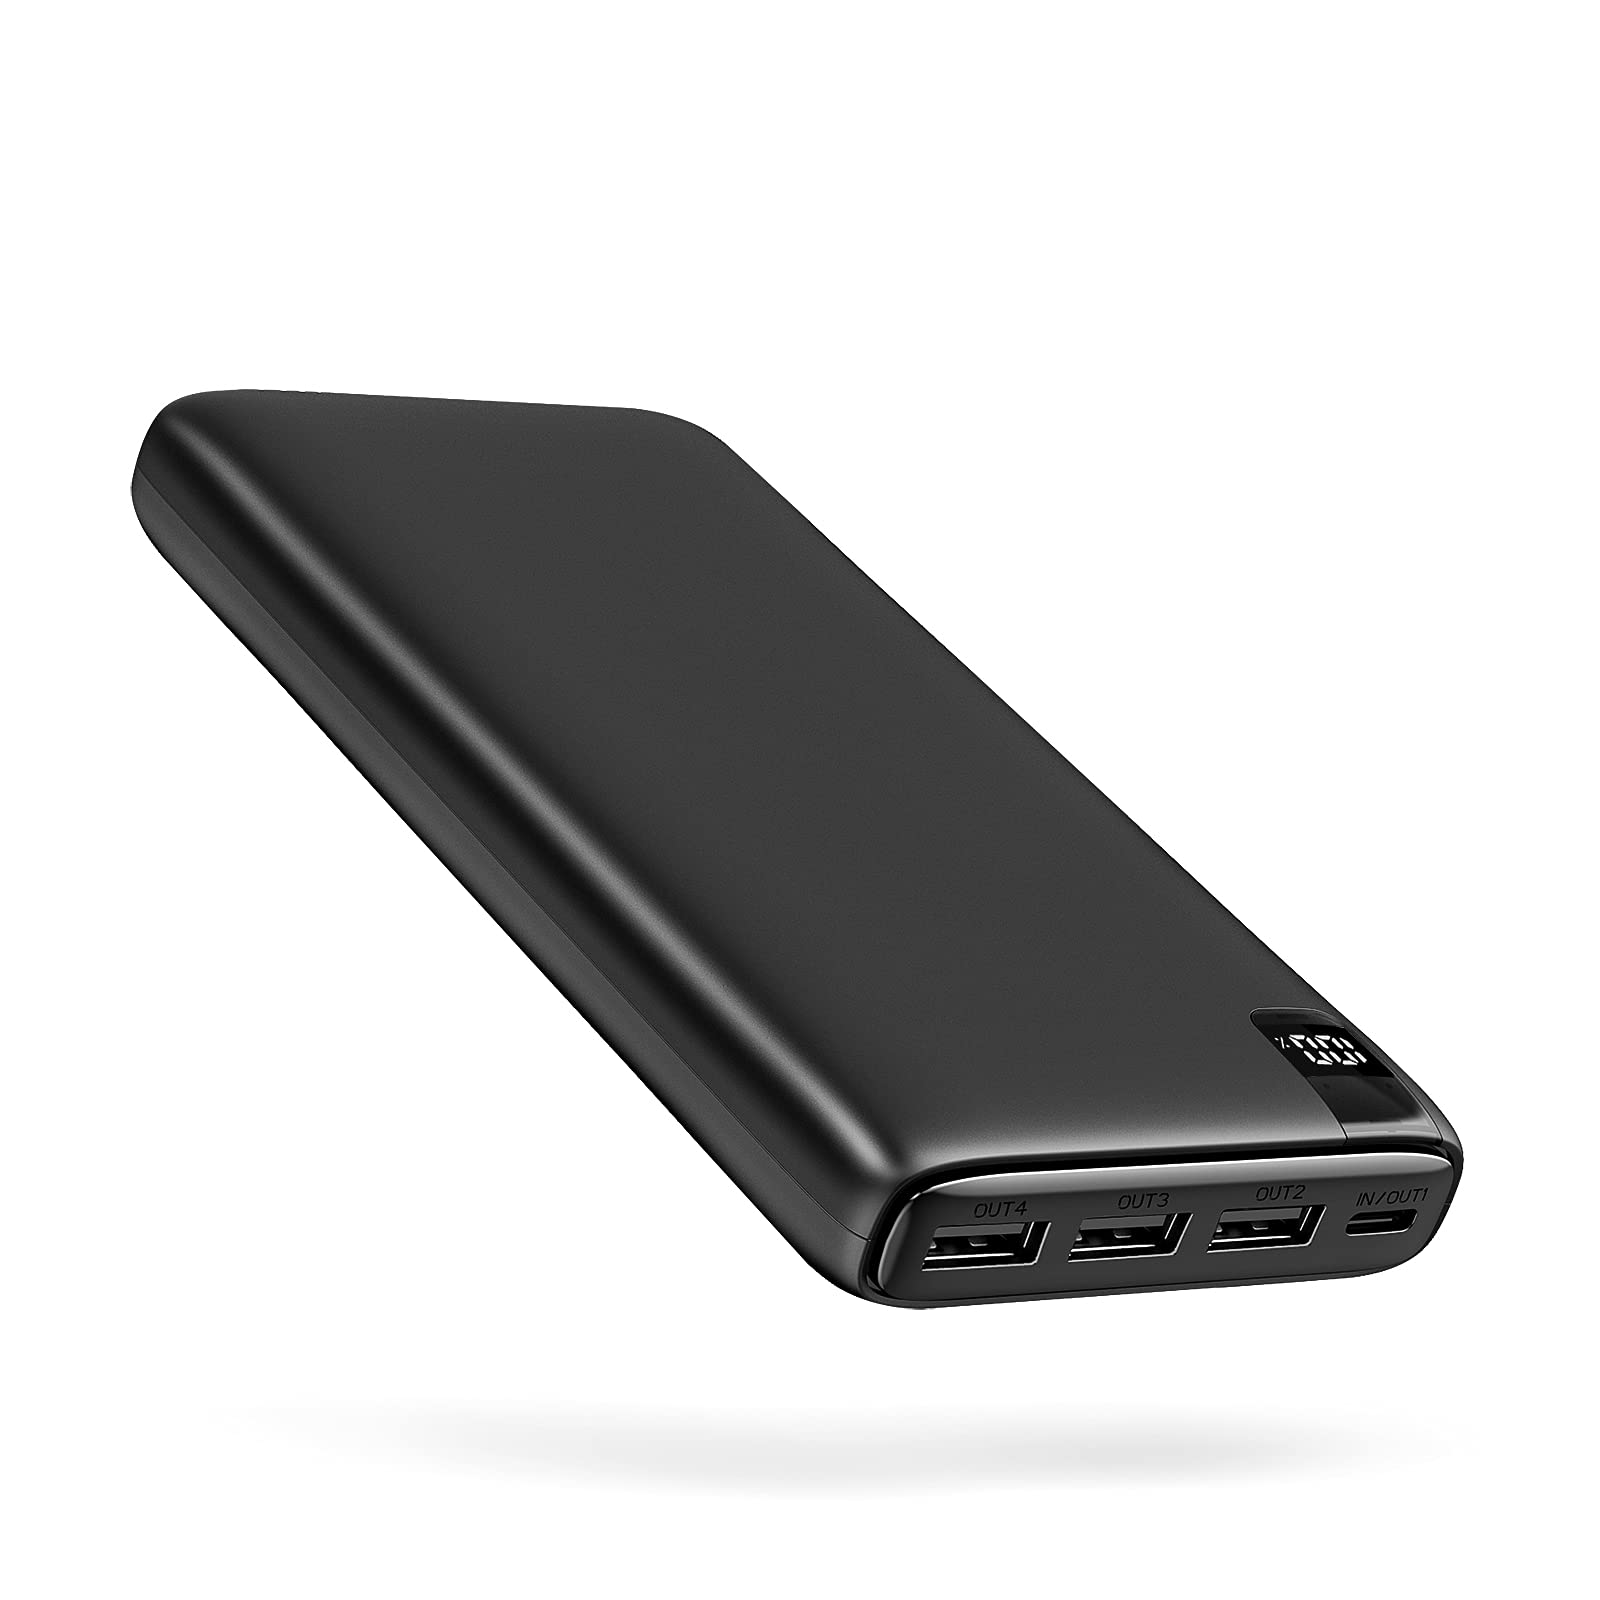 Power Bank 26800mAh Portable Charger, Riapow Fast Charging 3.0A USB C High Capacity Phone Charger with LED Display Compact External Battery Pack 4 Outputs for iPhone Samsung Tablet and More